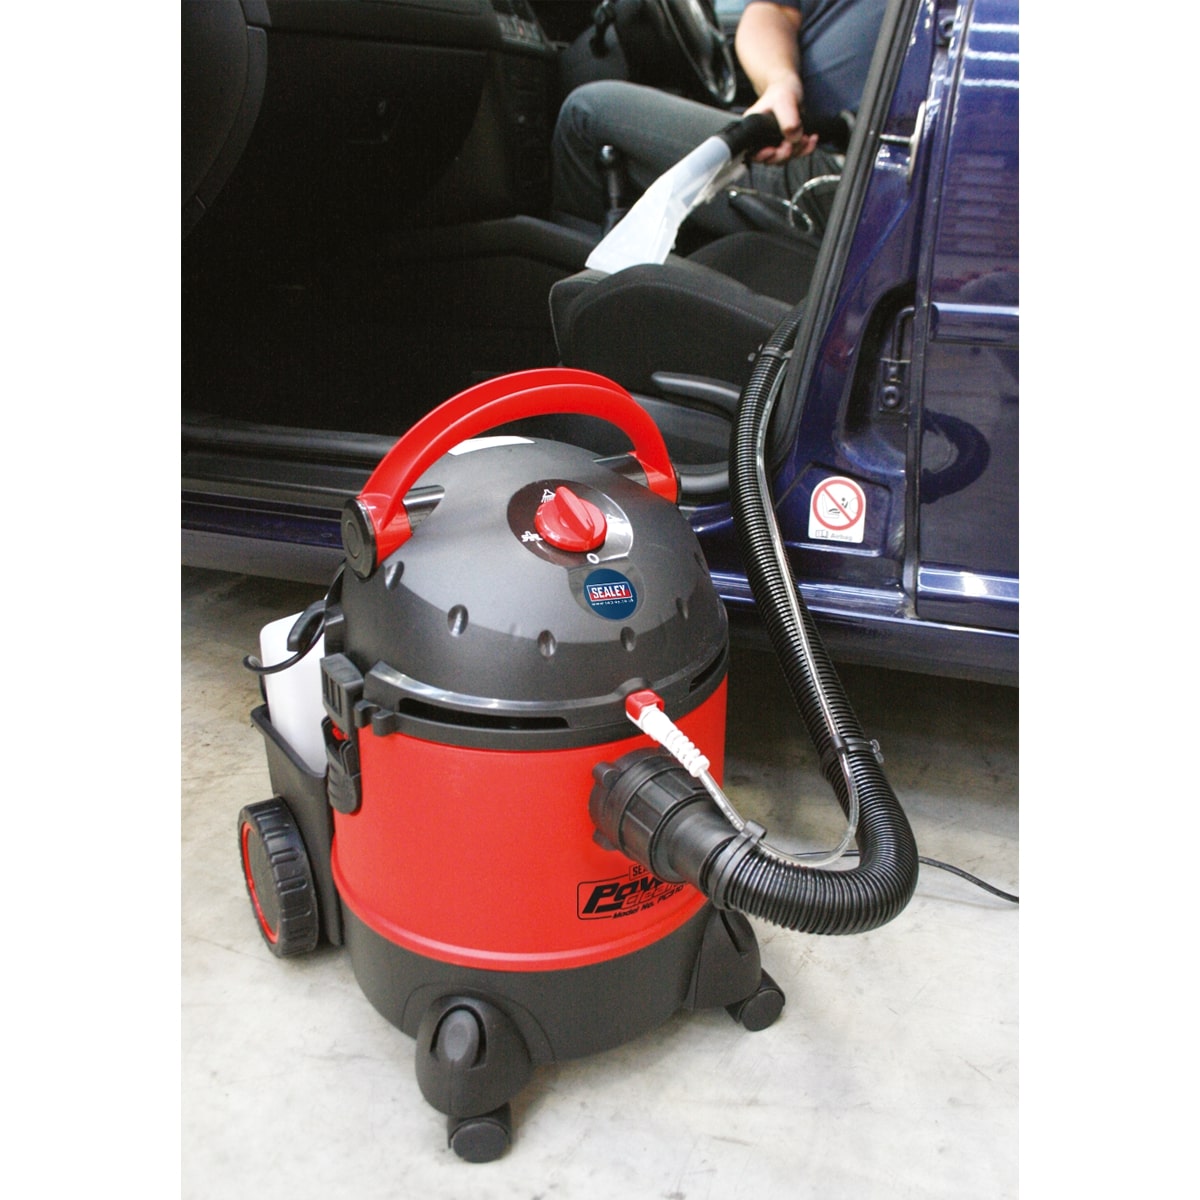 Sealey PC310 Valeting Machine Wet & Dry with Accessories 20ltr 1250W